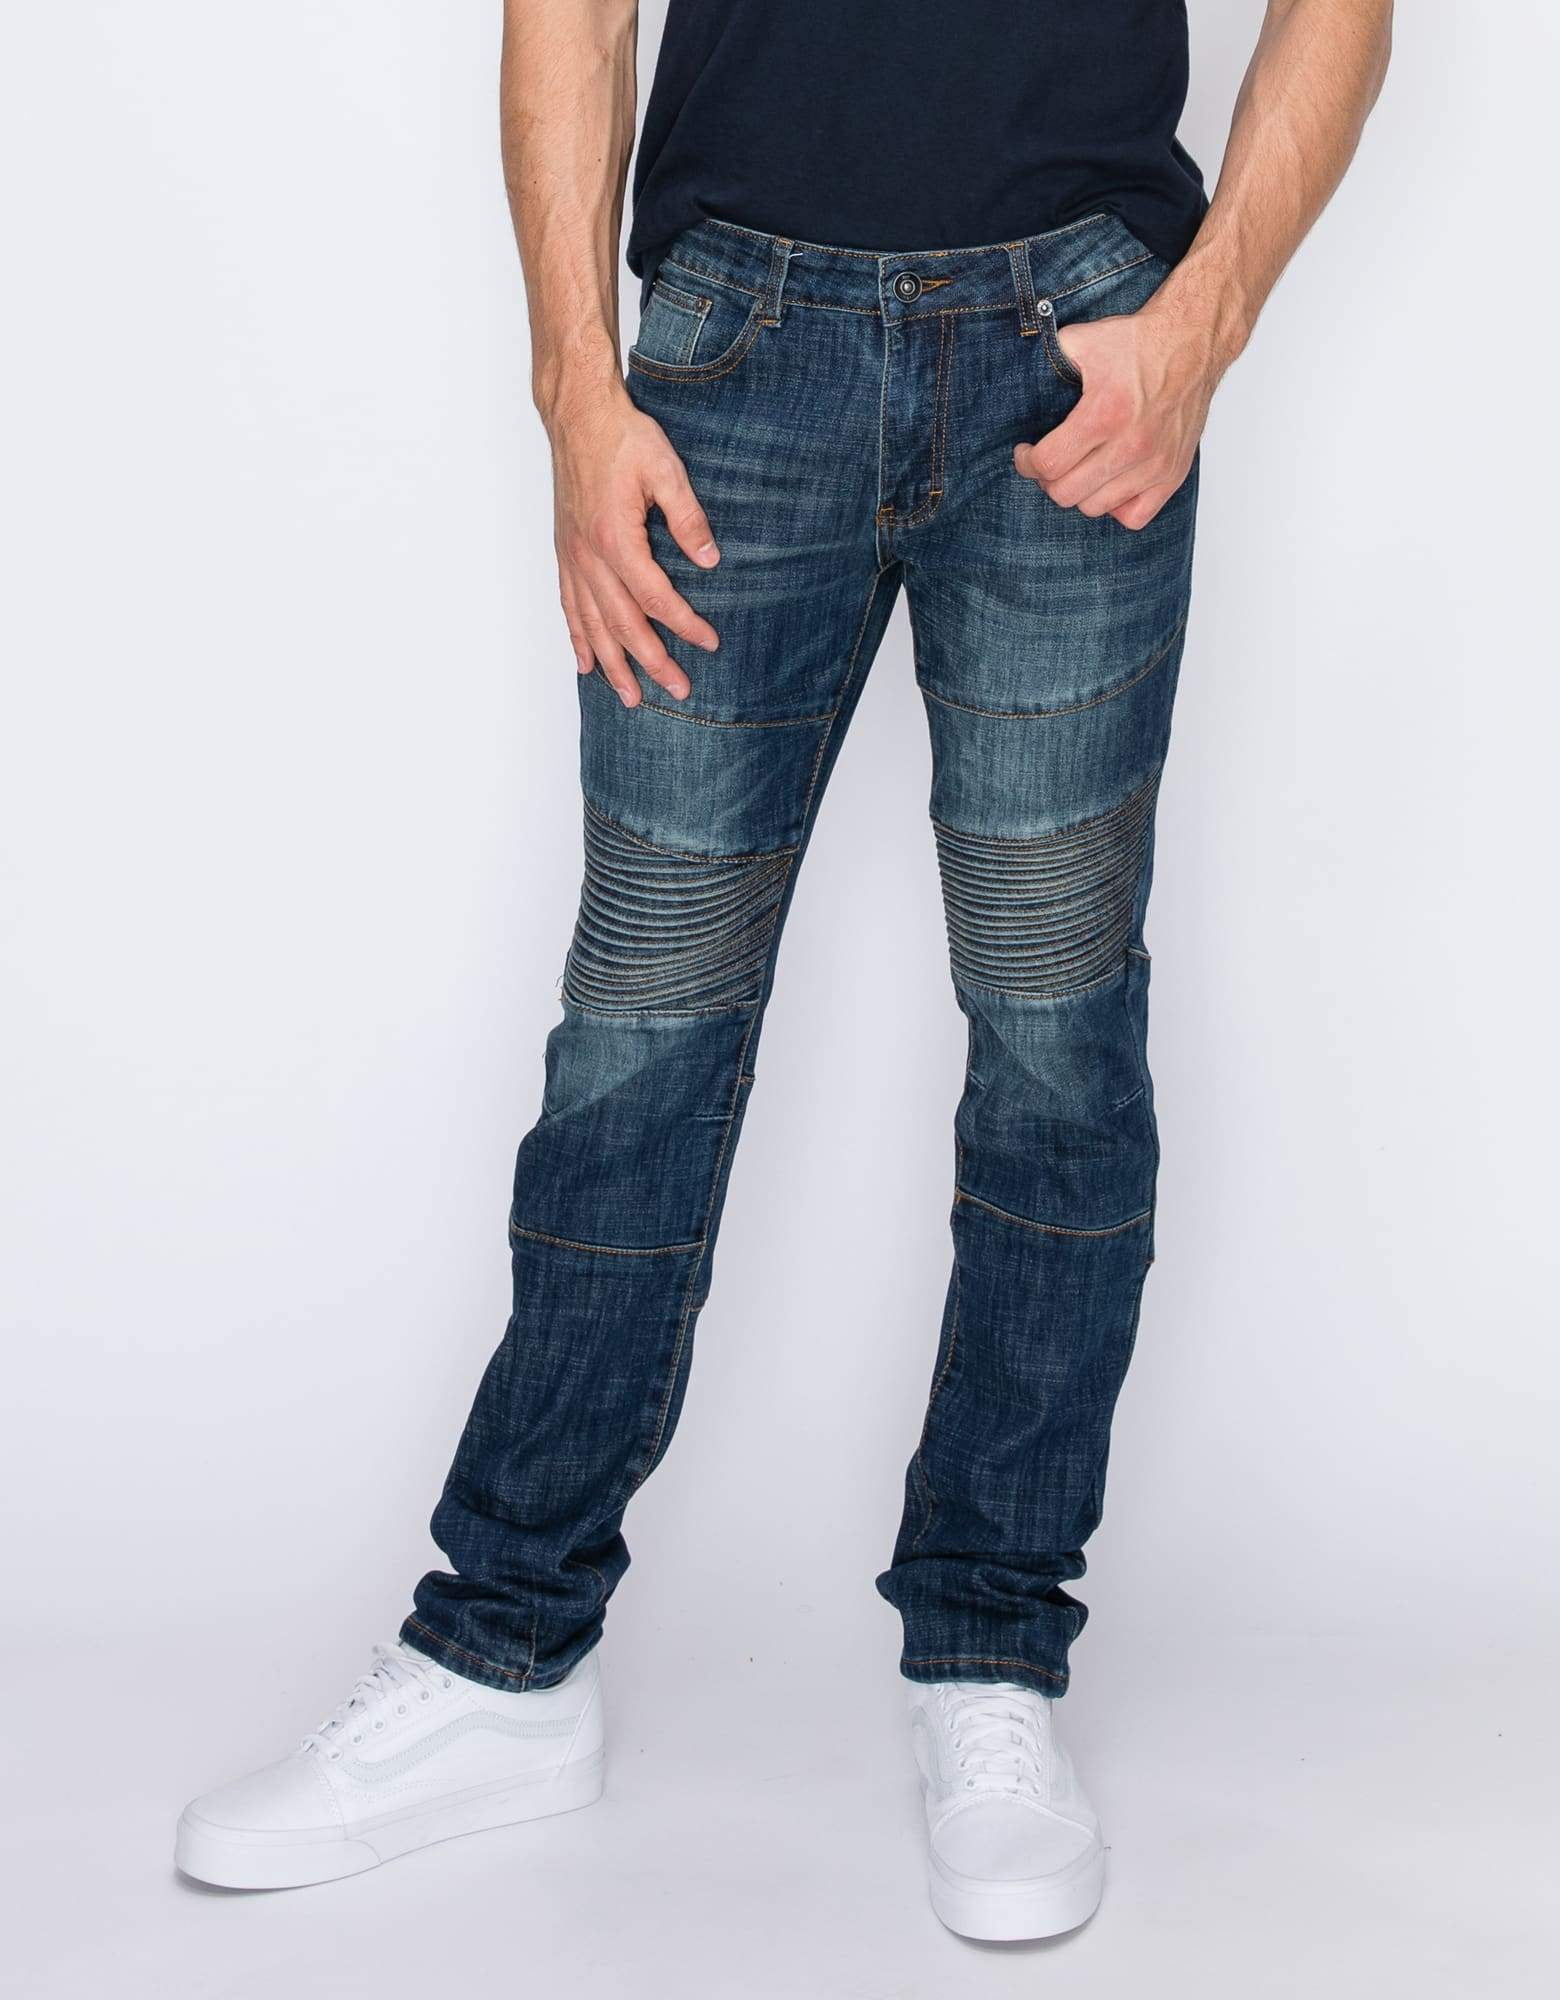 ring of fire stretch jeans